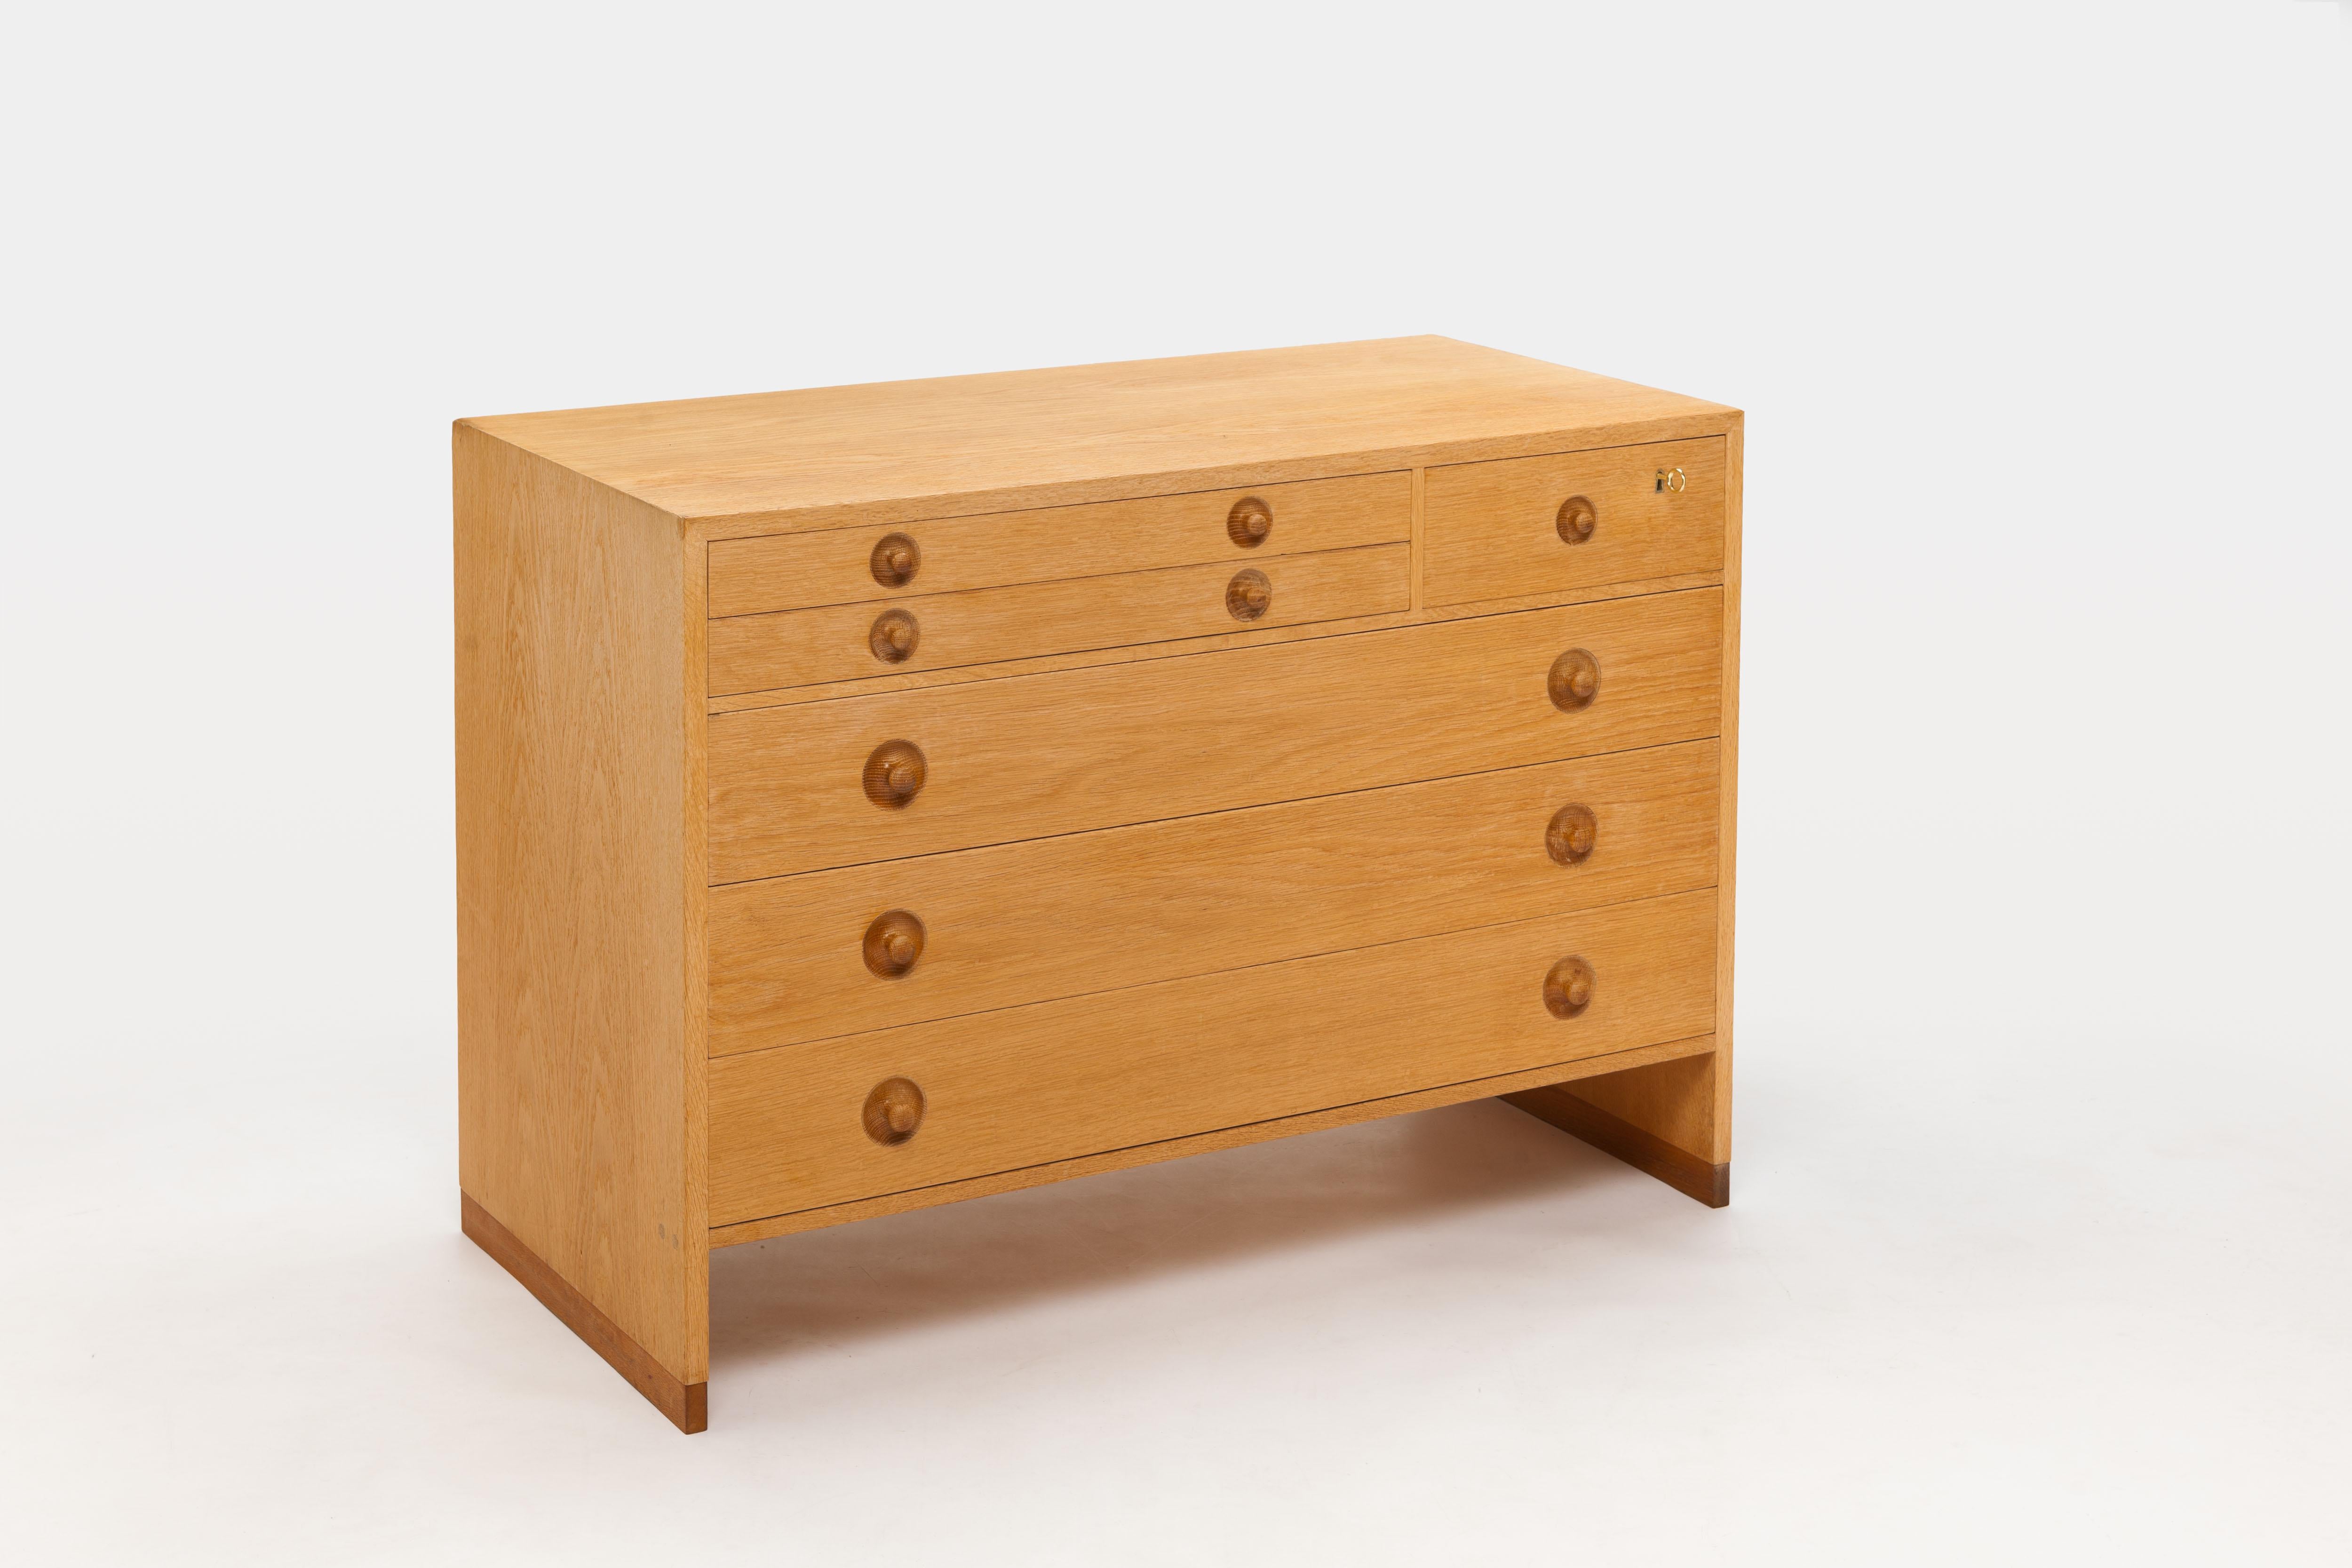 Oak chest of drawers model 16 with characteristic signature solid wooden pull's by Hans Wegner. 
The cabinet is equipped with different sizes of drawers, the top drawer of which is executed with original green felt. The other drawers are made of